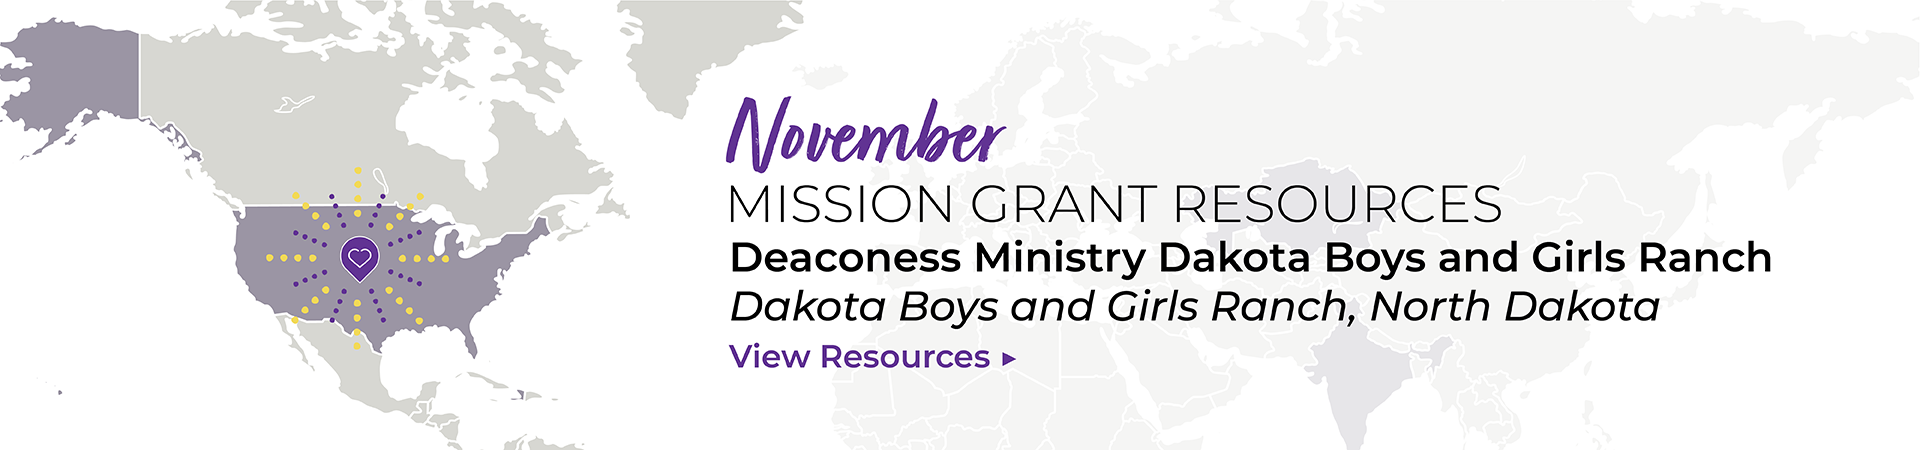 November Mission Grant Resources: A Healing Space for At-Risk Children. View Resources.